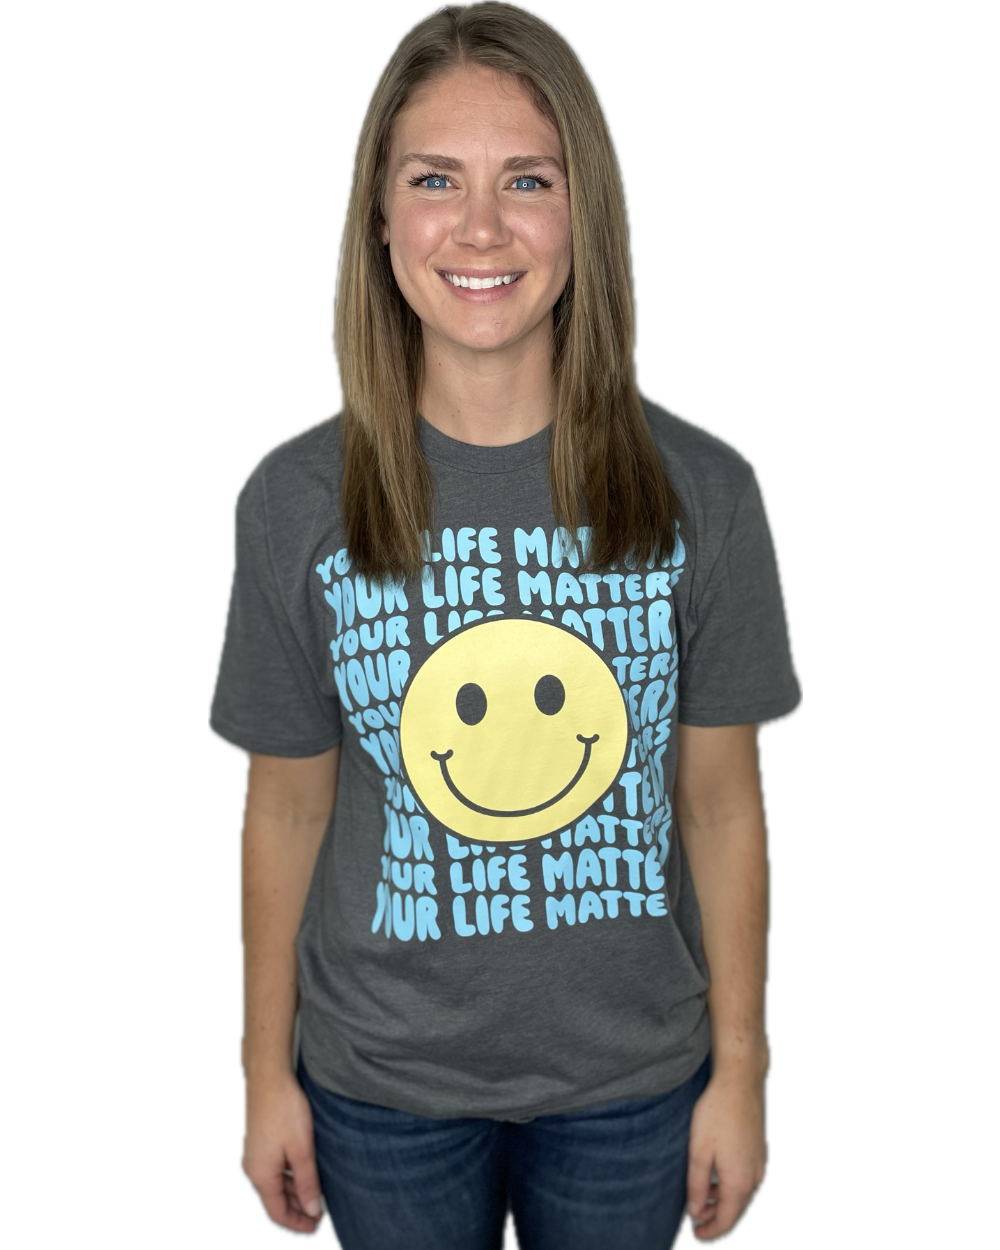 Your Life Matters Tee